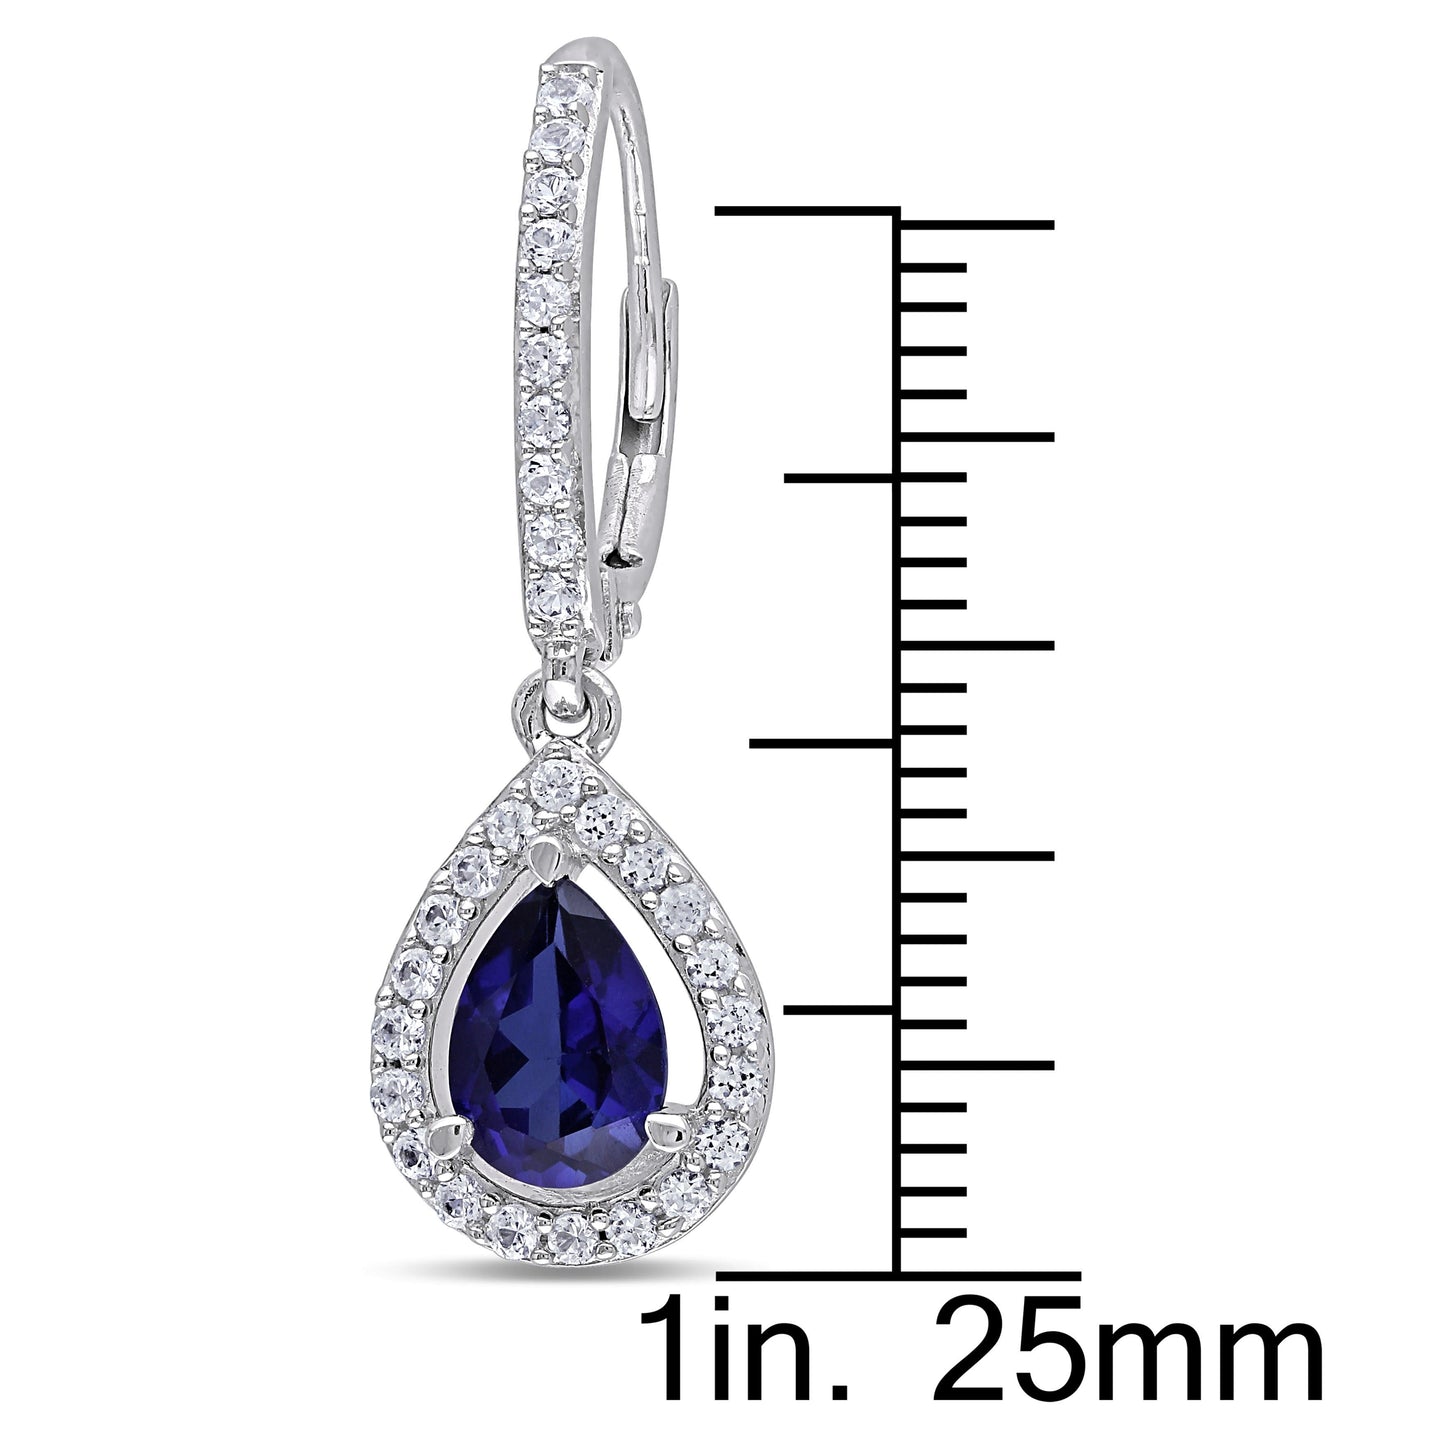 Blue & White Sapphire & Diamond Earrings in Sterling Silver – IceTrends